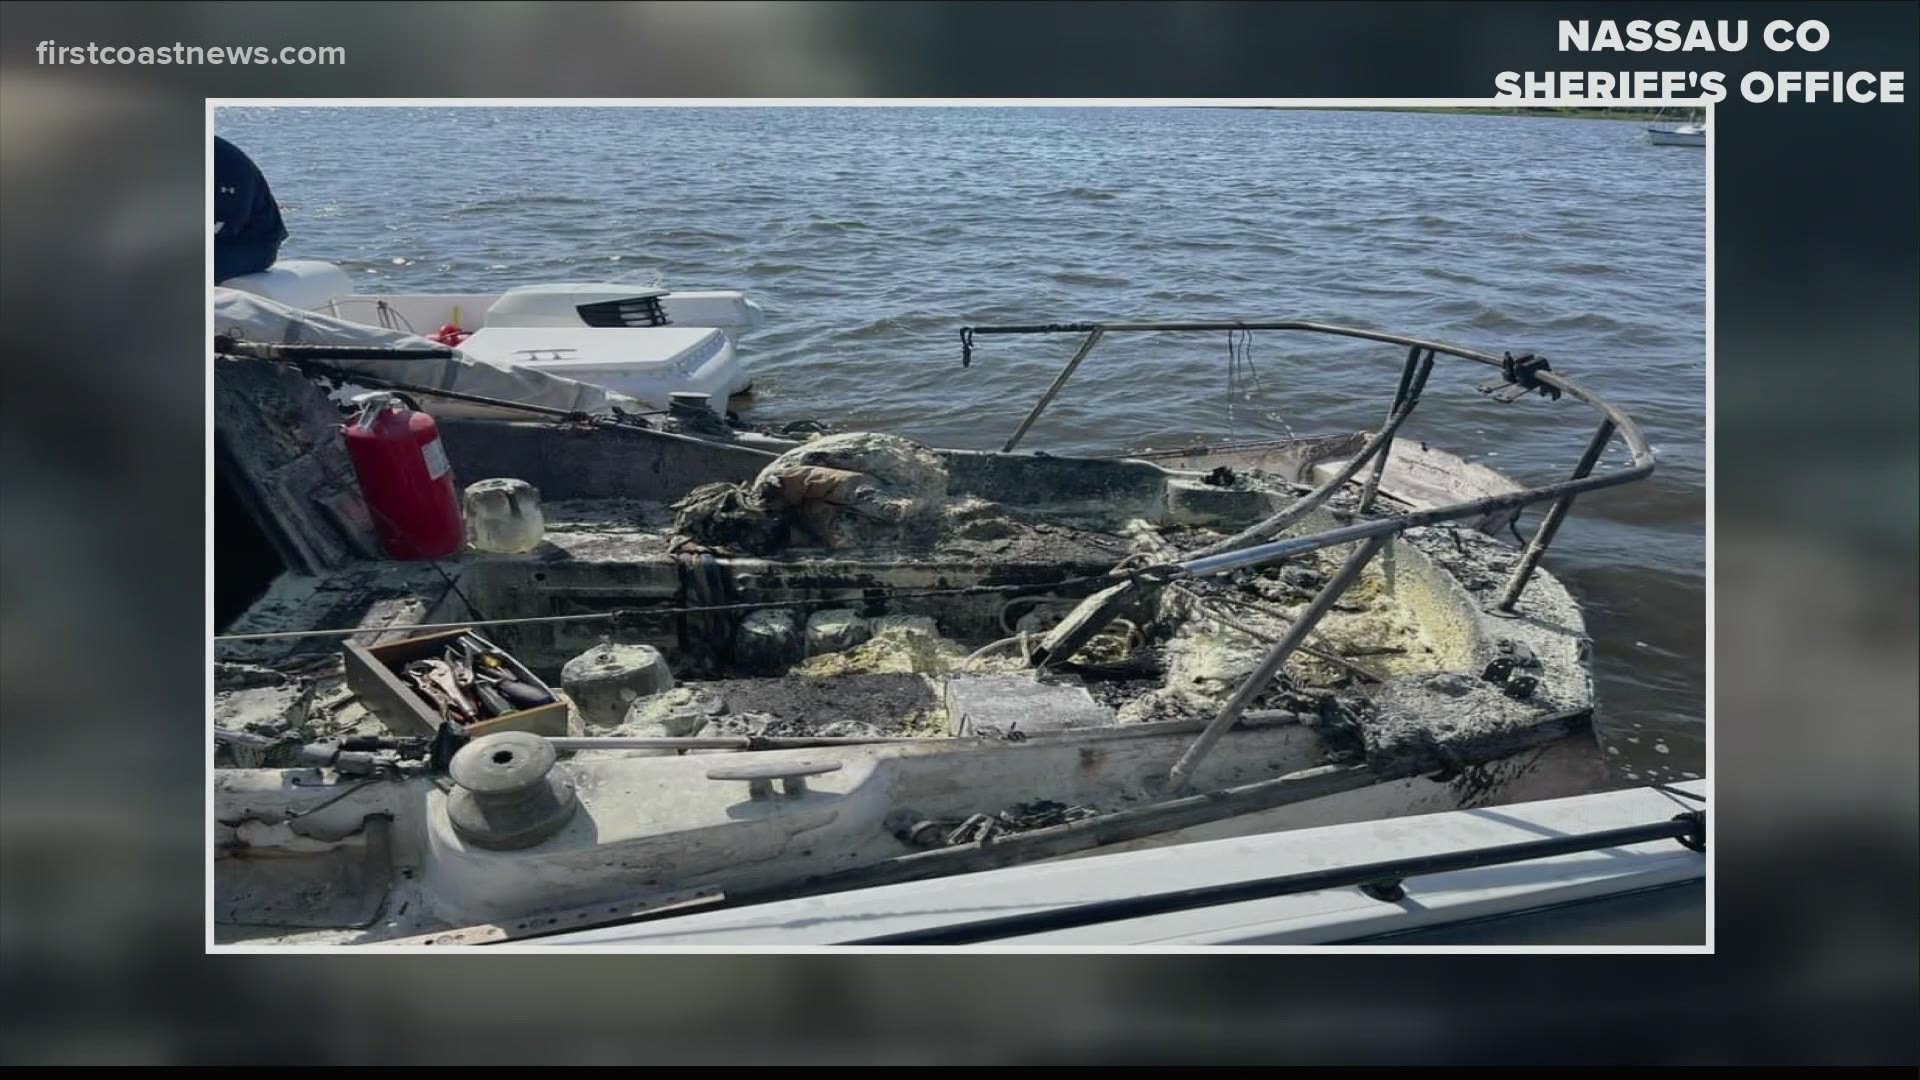 Authorities rescue 2 people from sailboat fire in Fernandina Beach